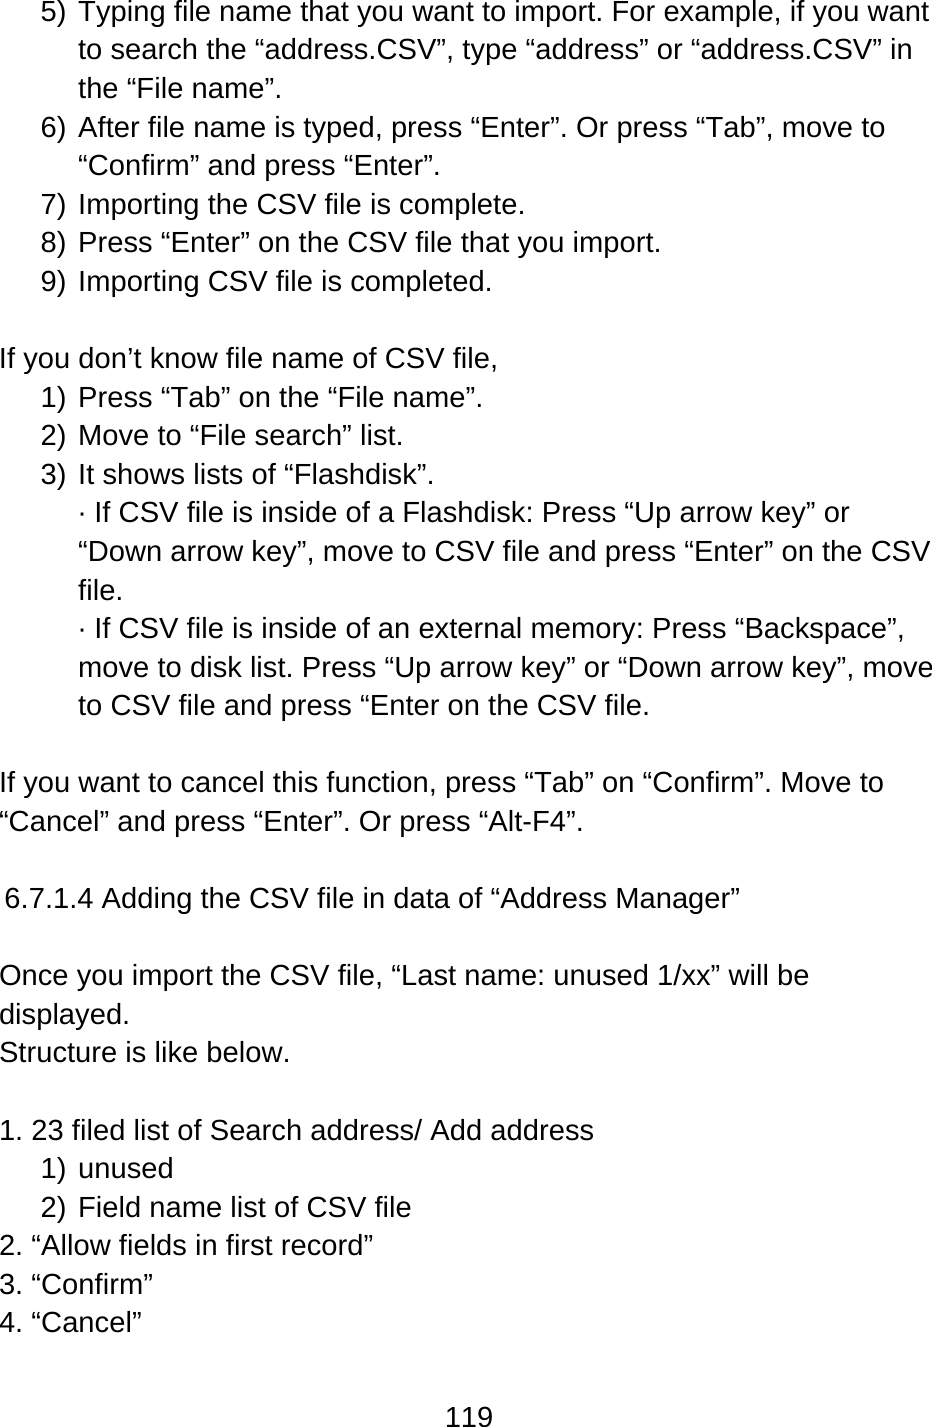 119  5) Typing file name that you want to import. For example, if you want to search the “address.CSV”, type “address” or “address.CSV” in the “File name”. 6) After file name is typed, press “Enter”. Or press “Tab”, move to “Confirm” and press “Enter”. 7) Importing the CSV file is complete. 8) Press “Enter” on the CSV file that you import. 9) Importing CSV file is completed.  If you don’t know file name of CSV file,   1) Press “Tab” on the “File name”. 2) Move to “File search” list. 3) It shows lists of “Flashdisk”. · If CSV file is inside of a Flashdisk: Press “Up arrow key” or “Down arrow key”, move to CSV file and press “Enter” on the CSV file. · If CSV file is inside of an external memory: Press “Backspace”, move to disk list. Press “Up arrow key” or “Down arrow key”, move to CSV file and press “Enter on the CSV file.  If you want to cancel this function, press “Tab” on “Confirm”. Move to “Cancel” and press “Enter”. Or press “Alt-F4”.  6.7.1.4 Adding the CSV file in data of “Address Manager”  Once you import the CSV file, “Last name: unused 1/xx” will be displayed.  Structure is like below.  1. 23 filed list of Search address/ Add address 1) unused 2) Field name list of CSV file 2. “Allow fields in first record” 3. “Confirm” 4. “Cancel”  